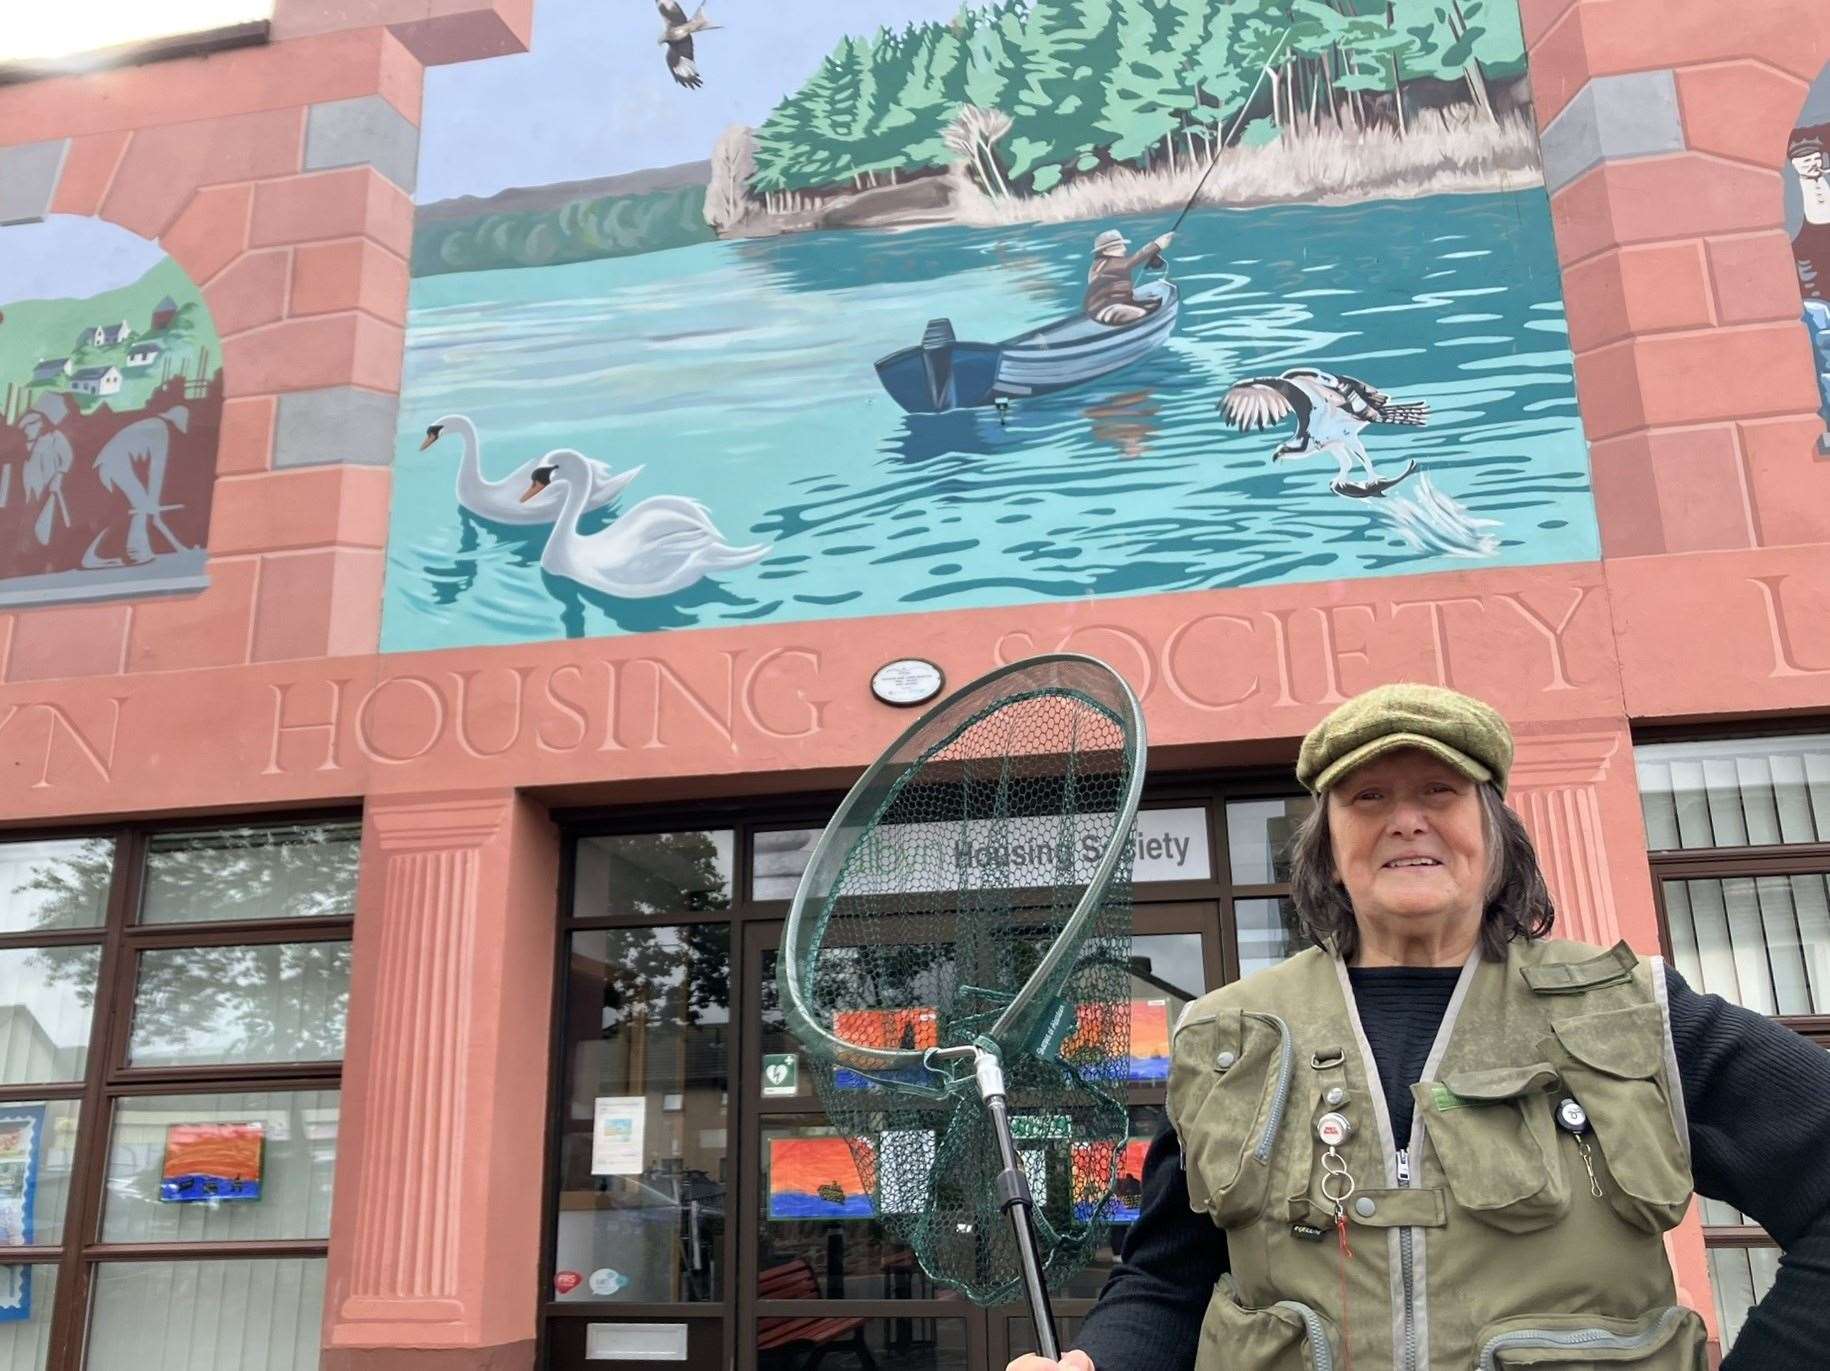 Catherine Williams, a former Kildary Angling Club member, at the Albyn Housing Society mural. Picture: Iona MacDonald.